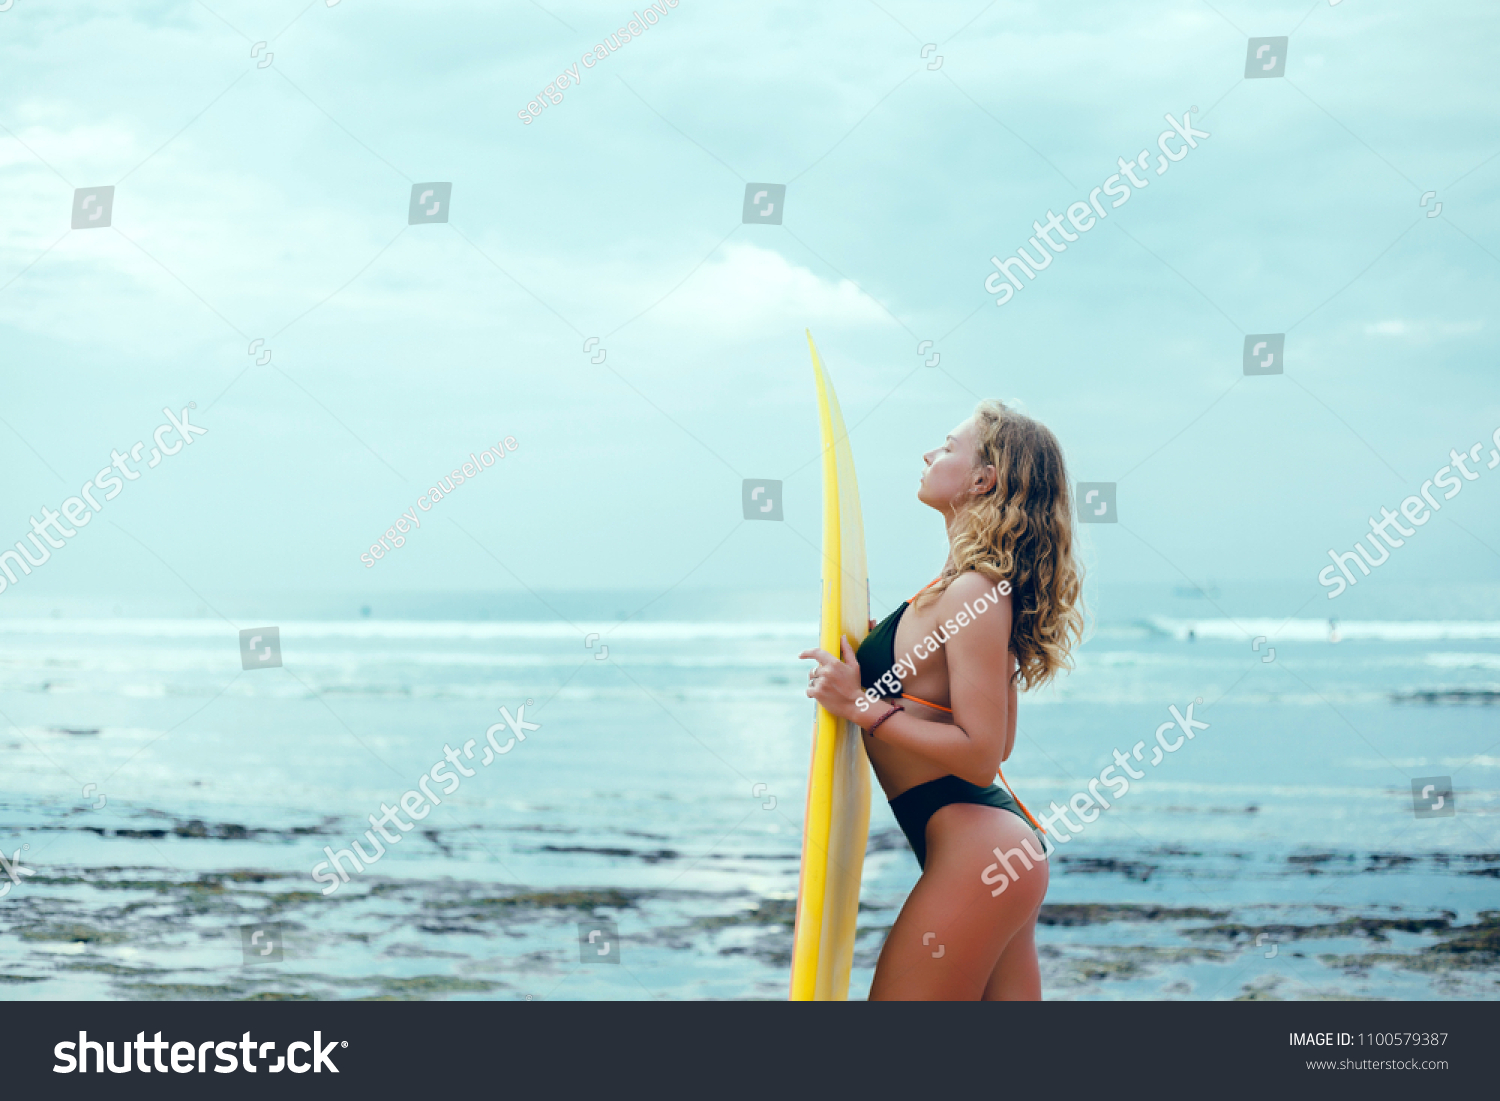 Surf Girl Long Hair Go Surfing Stock Photo Edit Now 1100579387